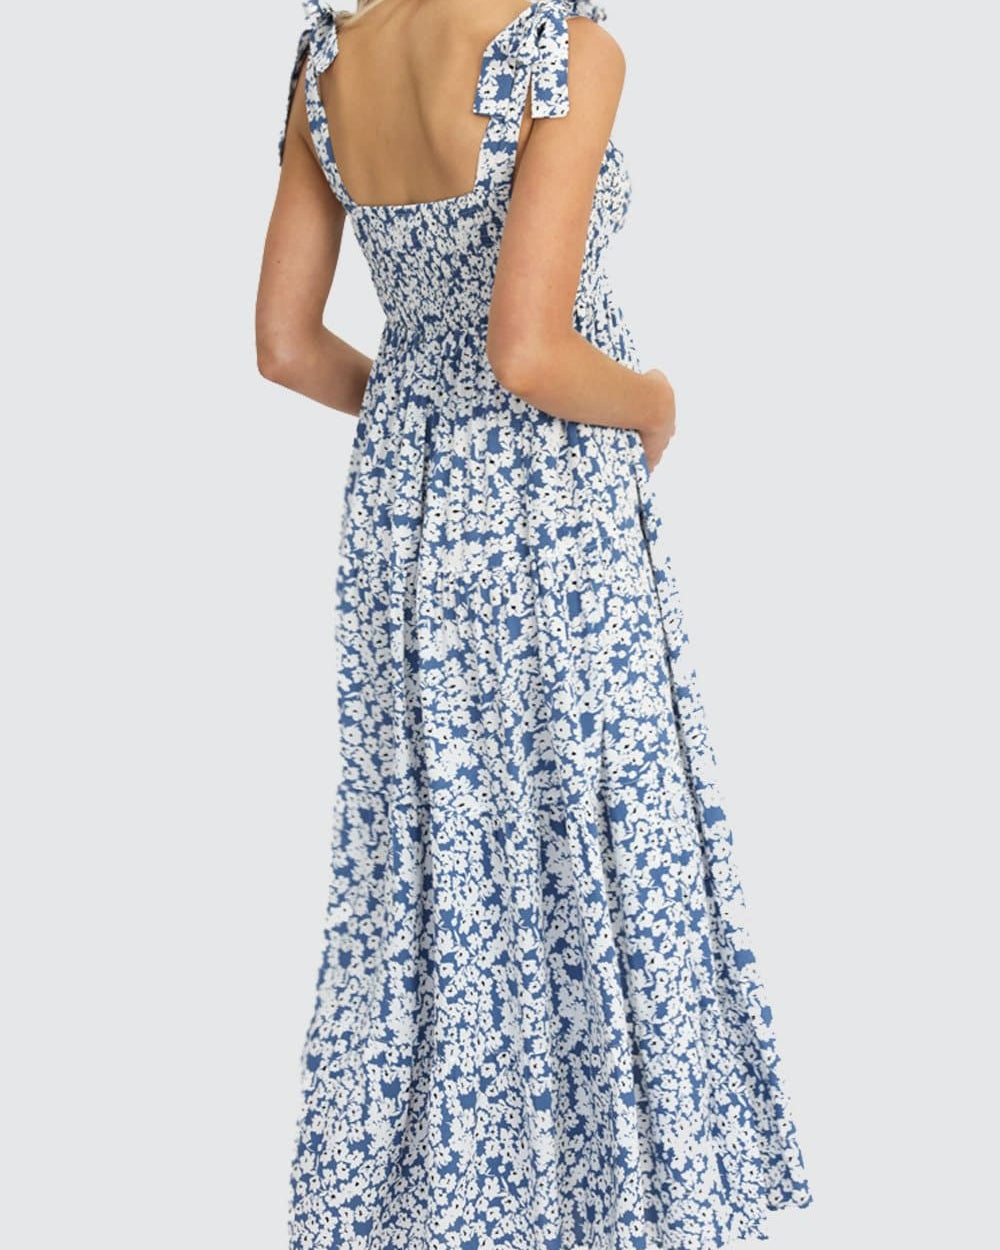 Back View - A pregnant Woman in Nursing Friendly Shoulder Tie Maternity Maxi Dress in Blue Print